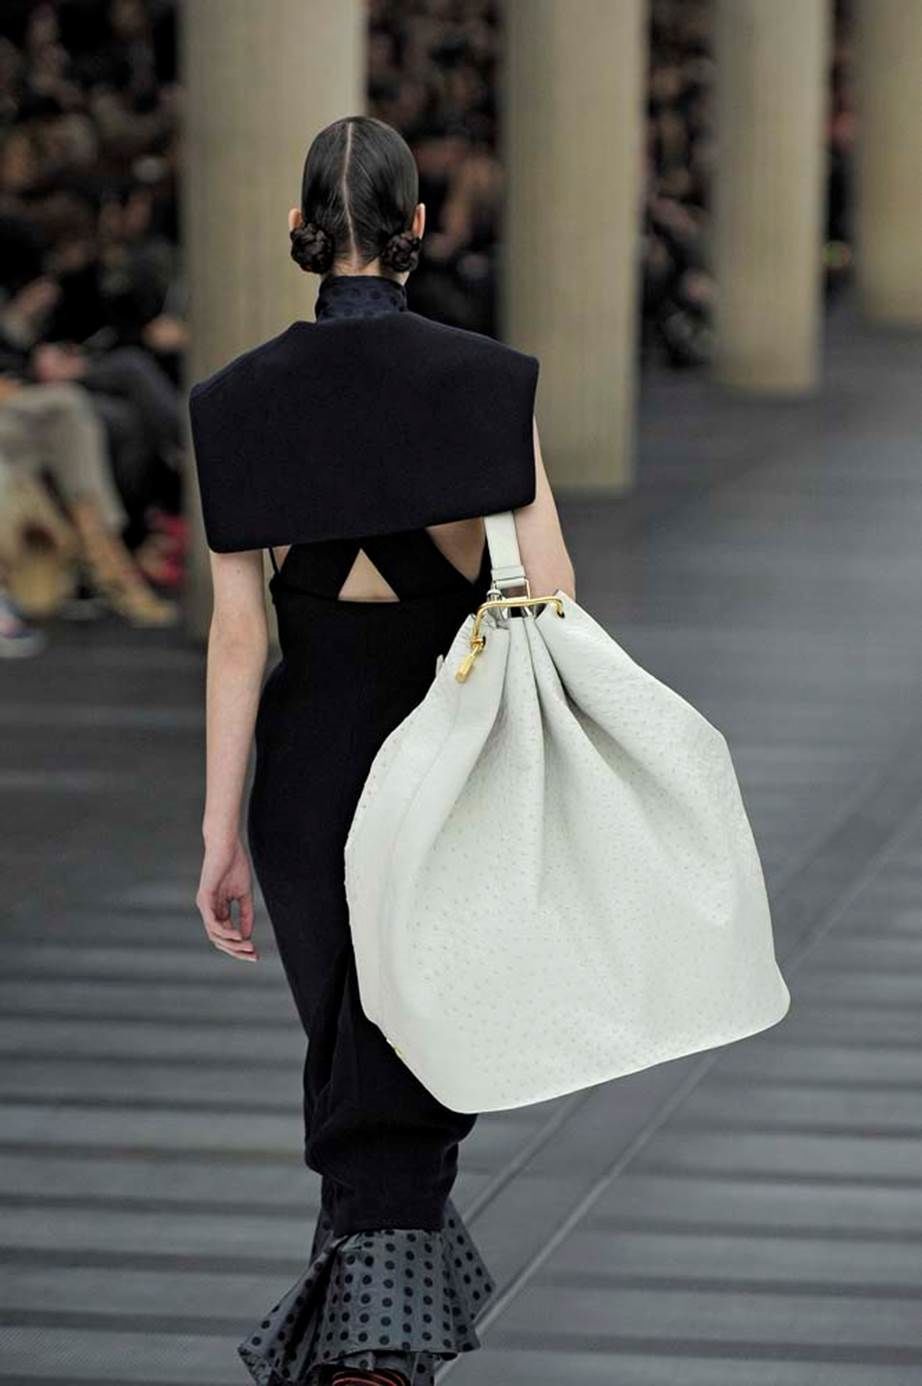 Model Bag Lines That Have Been Viral Throughout Fashion History